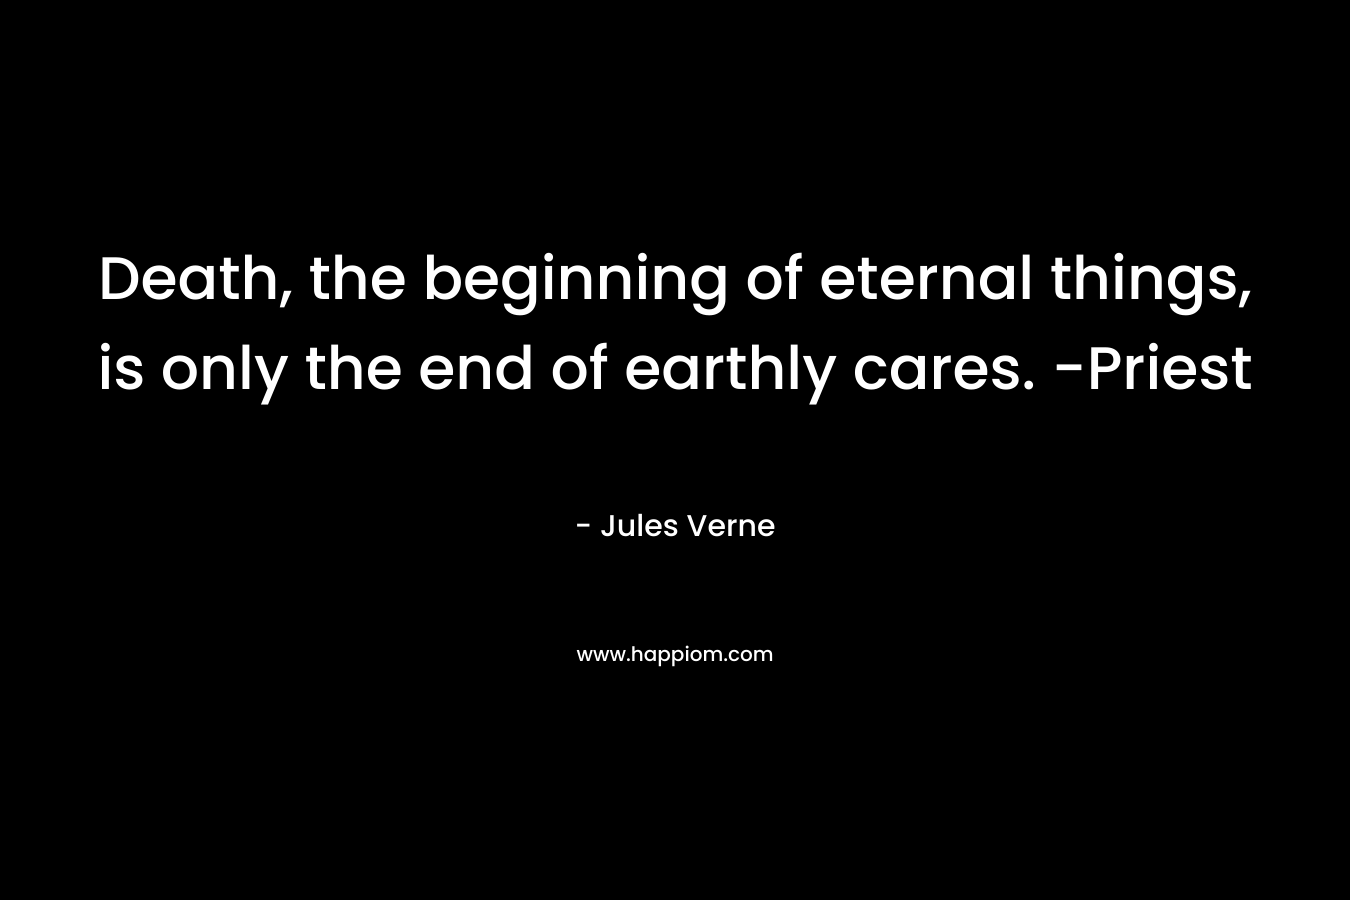 Death, the beginning of eternal things, is only the end of earthly cares. -Priest – Jules Verne